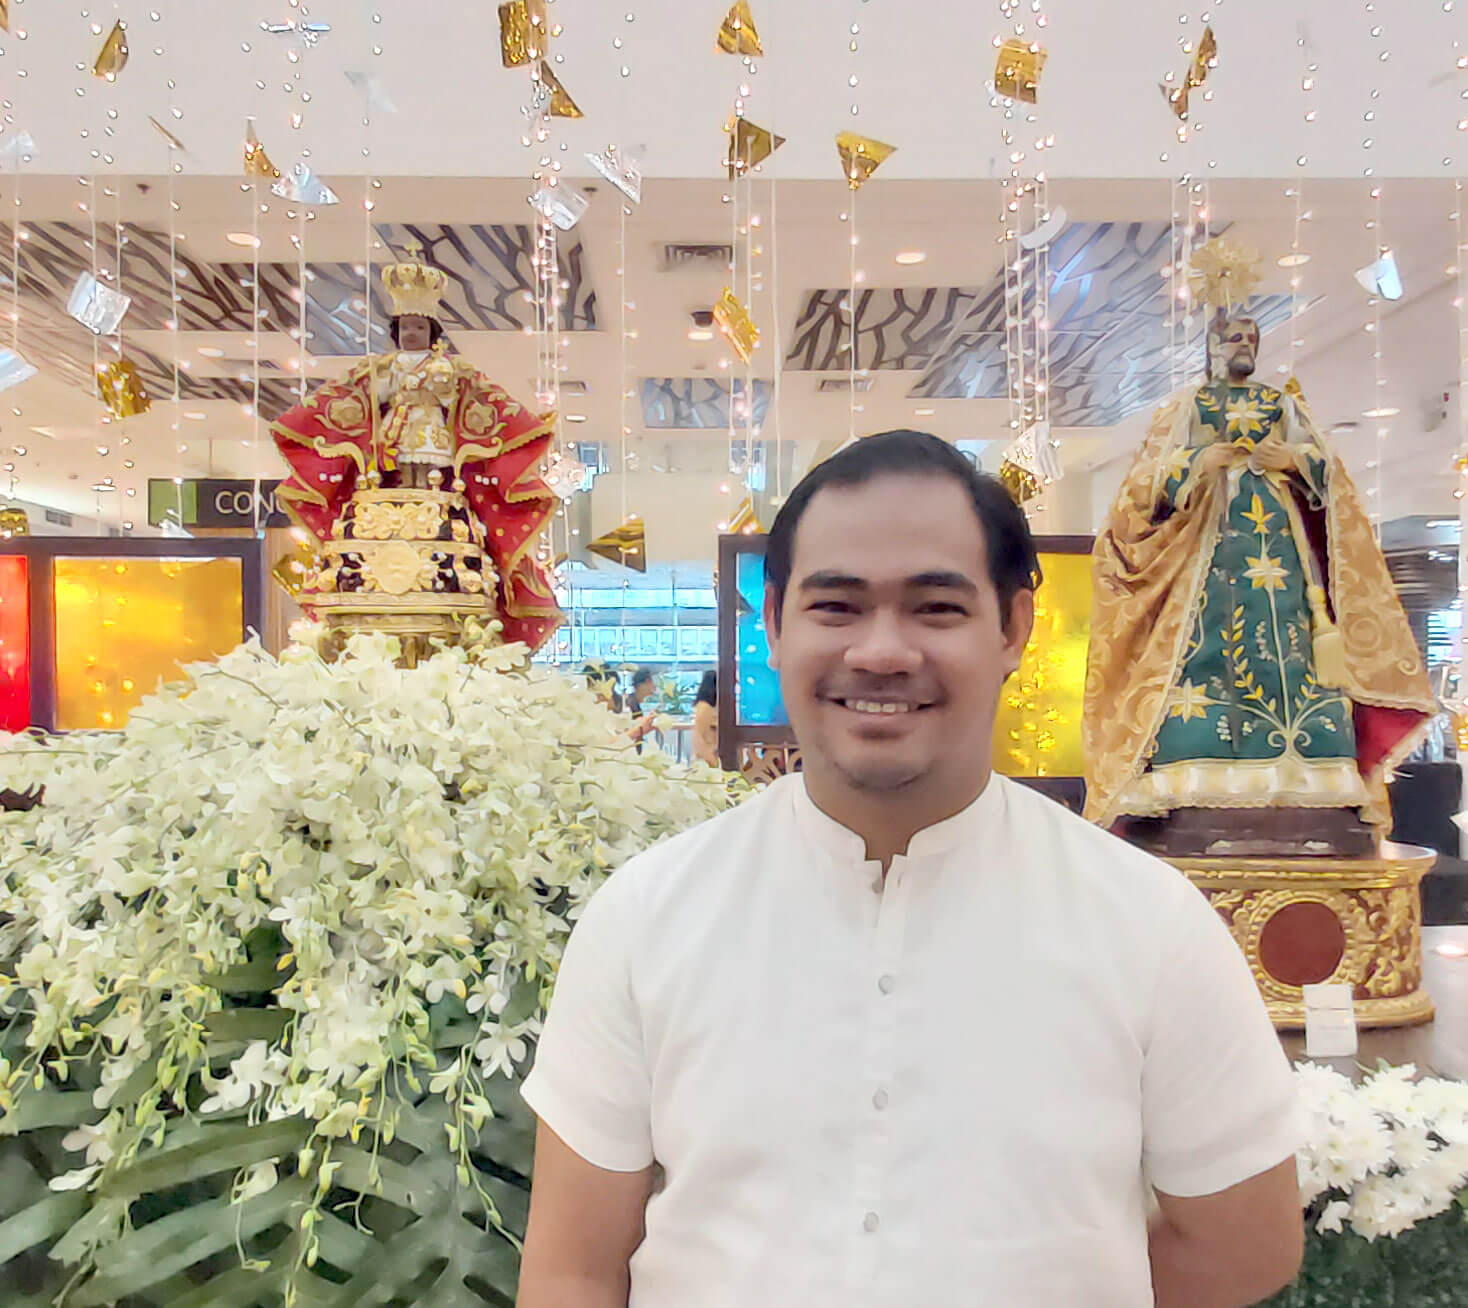 DEVOTEE-COLLECTOR. Sto. Niño devotee Ellis Mendez, 28, has 14 images from his collection in the exhibit. Among these is a replica of the Sto. Niño de Praga (Infant Jesus of Prague), which is among the most popular representations of the Child Jesus.